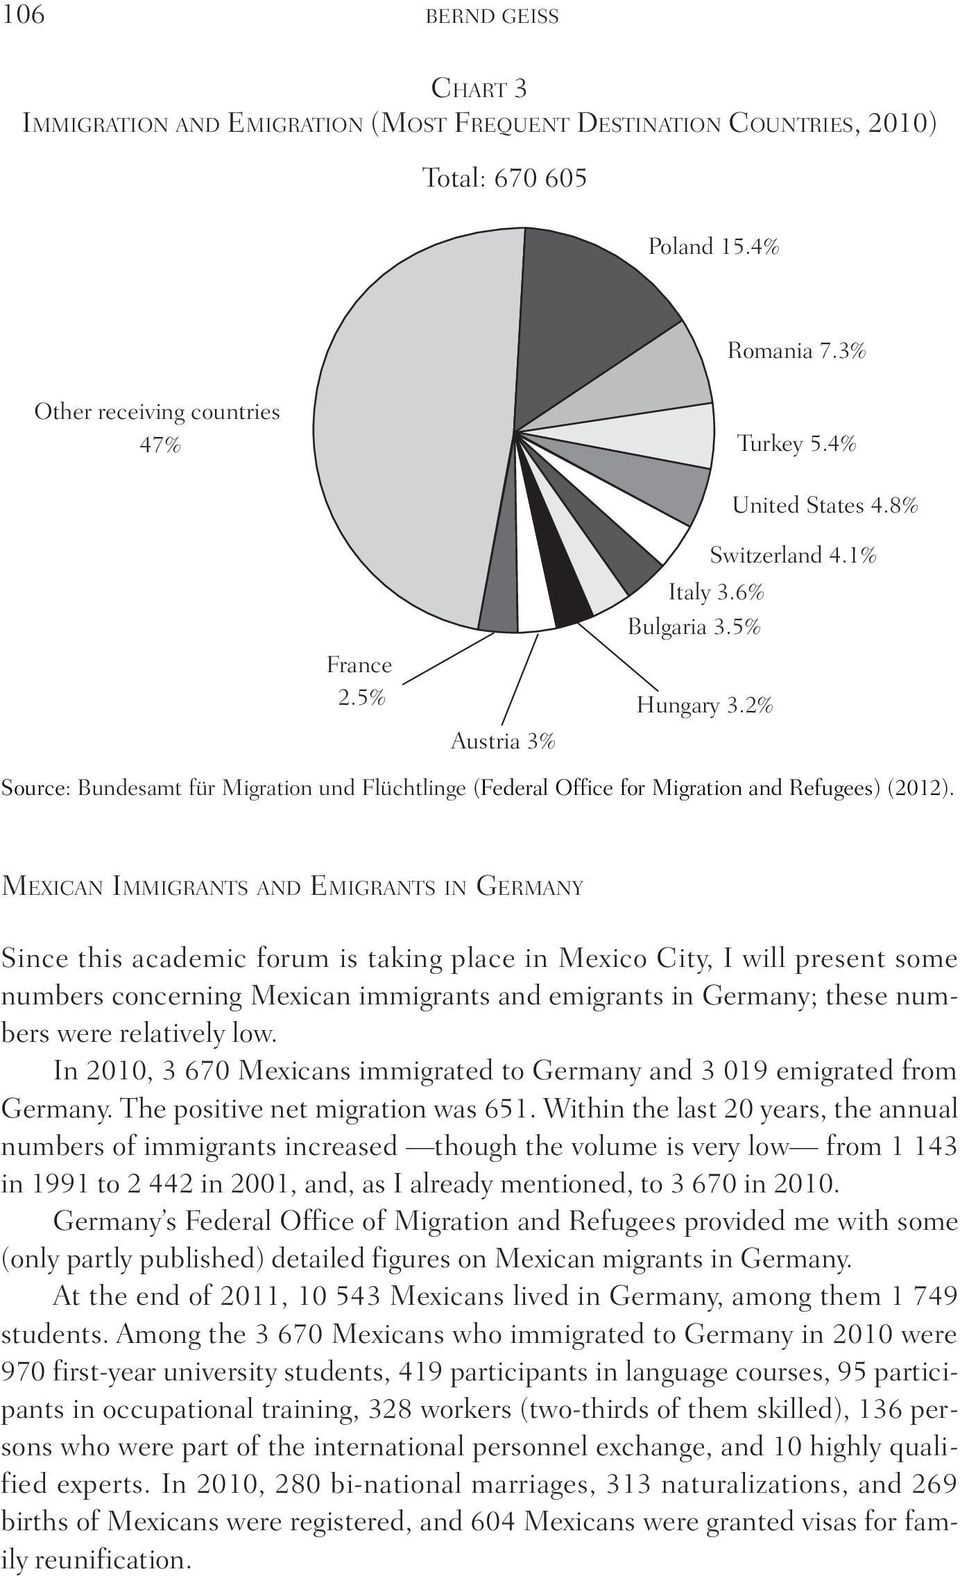 Mexican Immigrants and Emigrants in Germany Since this academic forum is taking place in Mexico City, I will present some numbers concerning Mexican immigrants and emigrants in Germany; these numbers